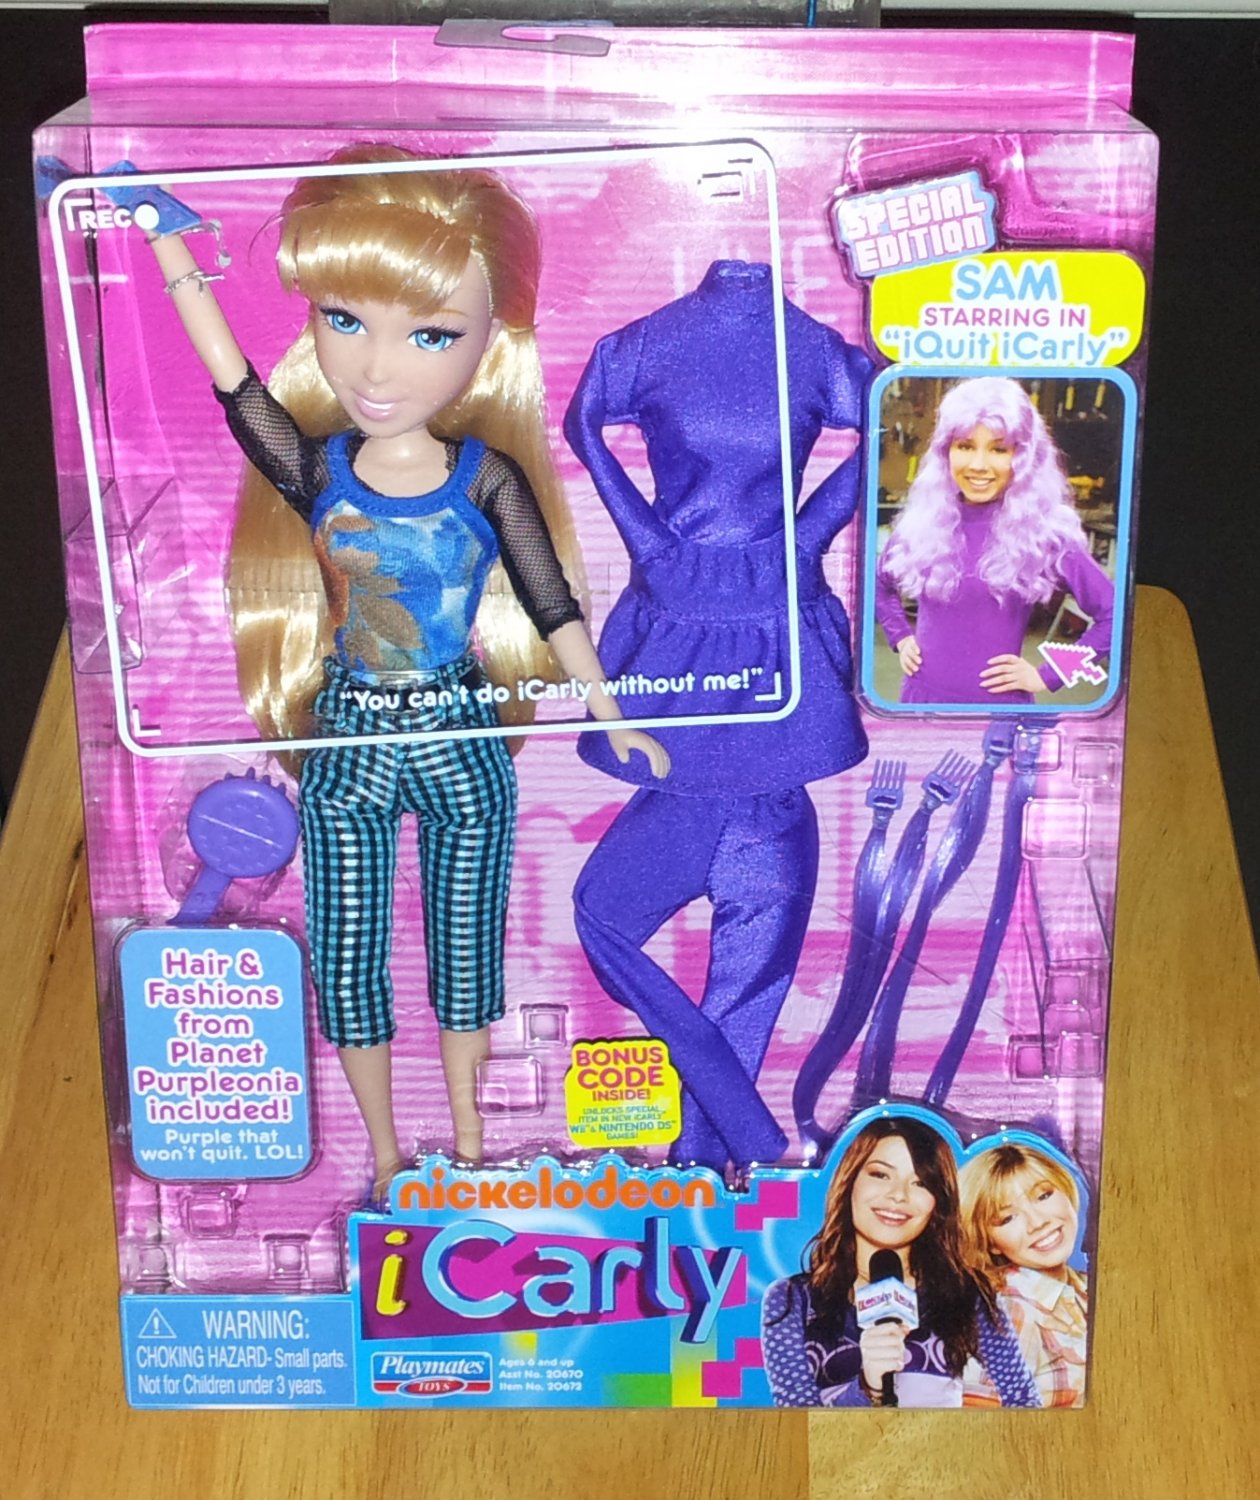 Sam From iCarly Special Edition "iQuit iCarly" Doll.